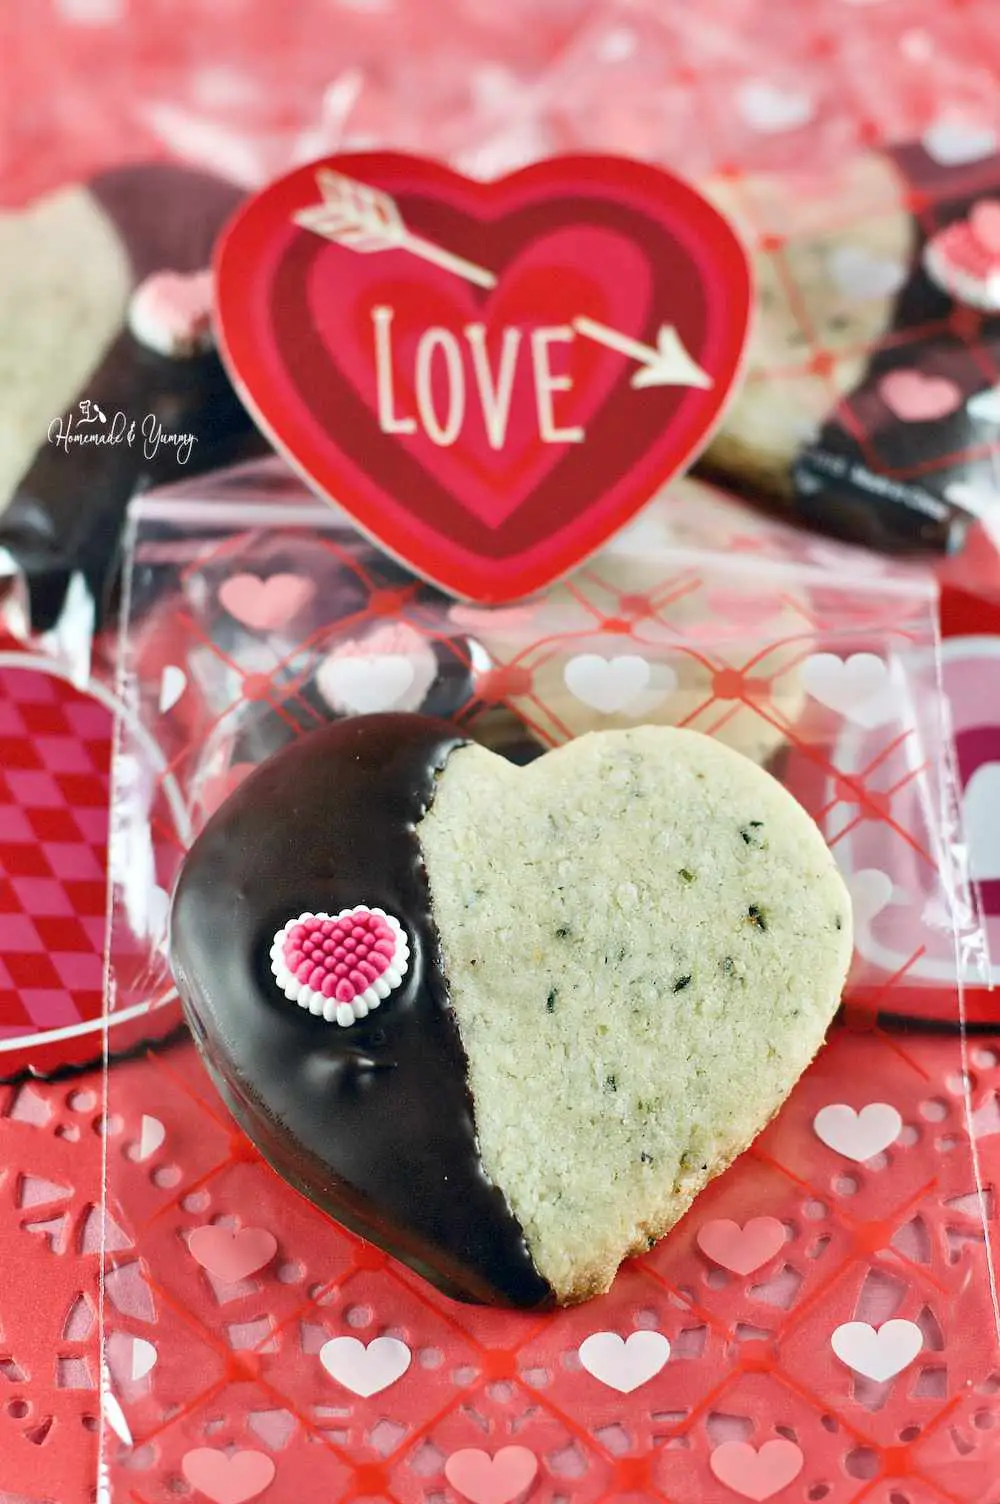 Valentine treat bag with a heart shaped cookie made with hemp seeds